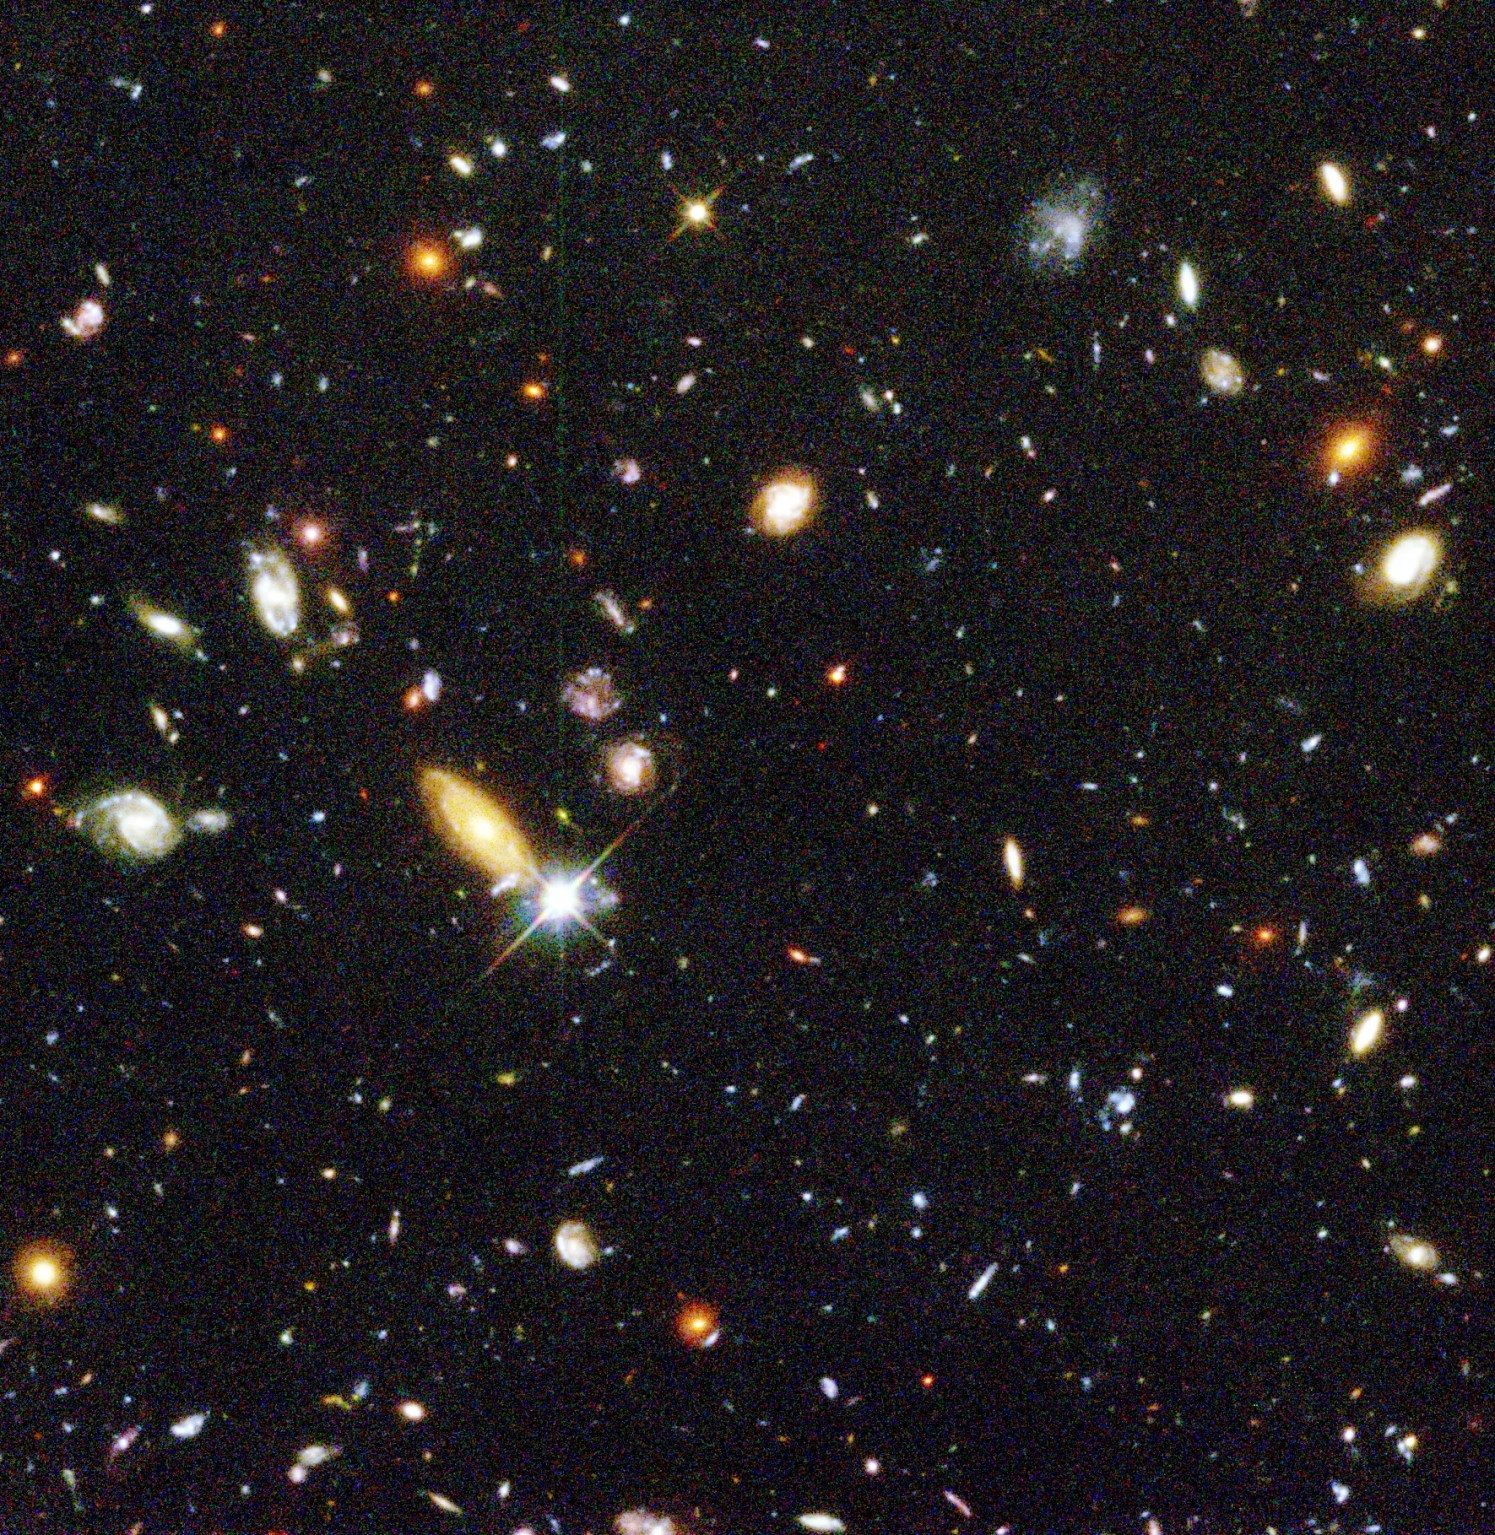 Field is filled with galaxies in colors of white, yellow, blue-white, and red; all on a black background.